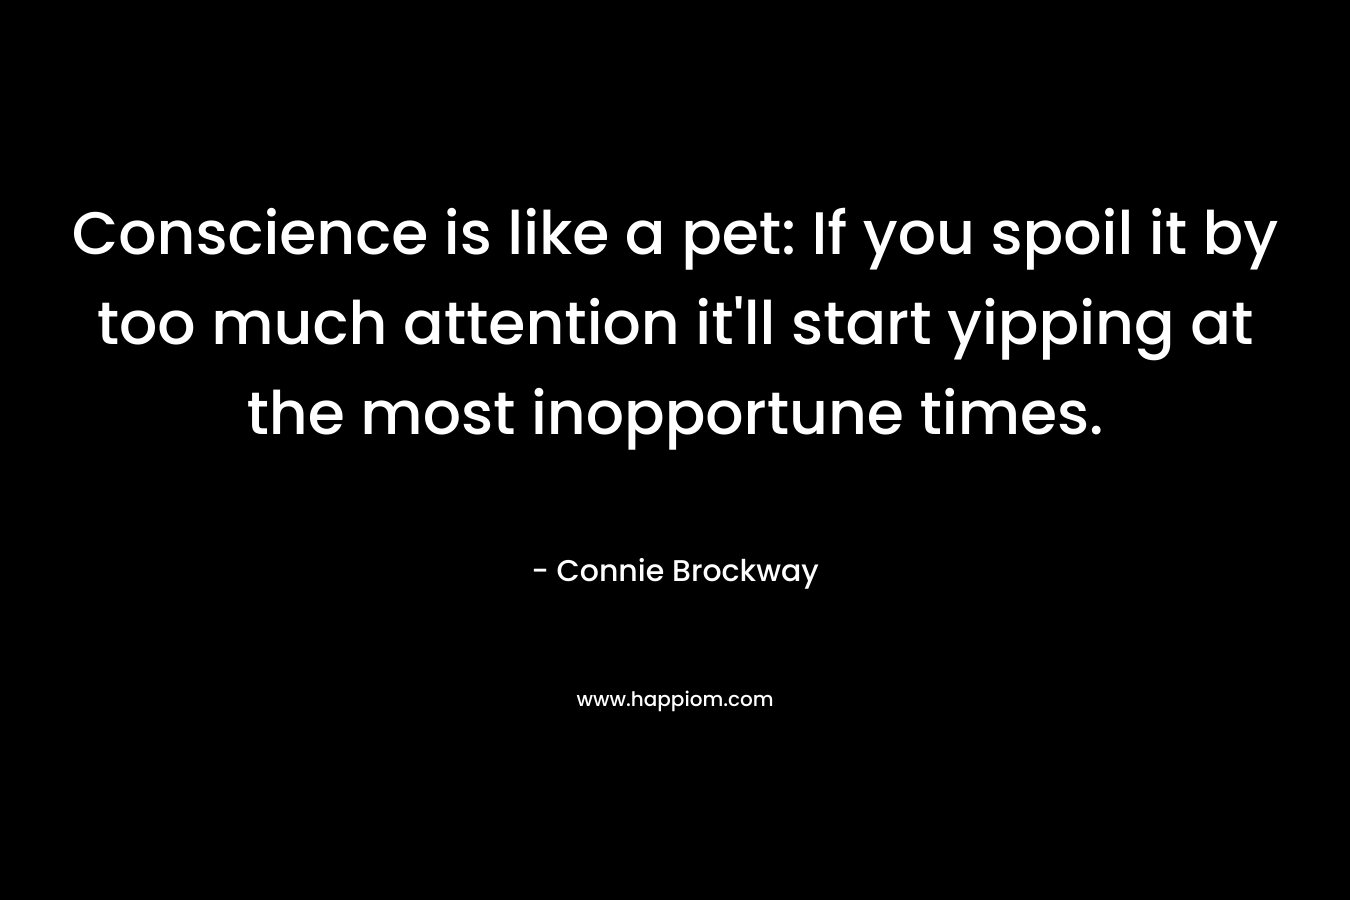 Conscience is like a pet: If you spoil it by too much attention it'll start yipping at the most inopportune times.